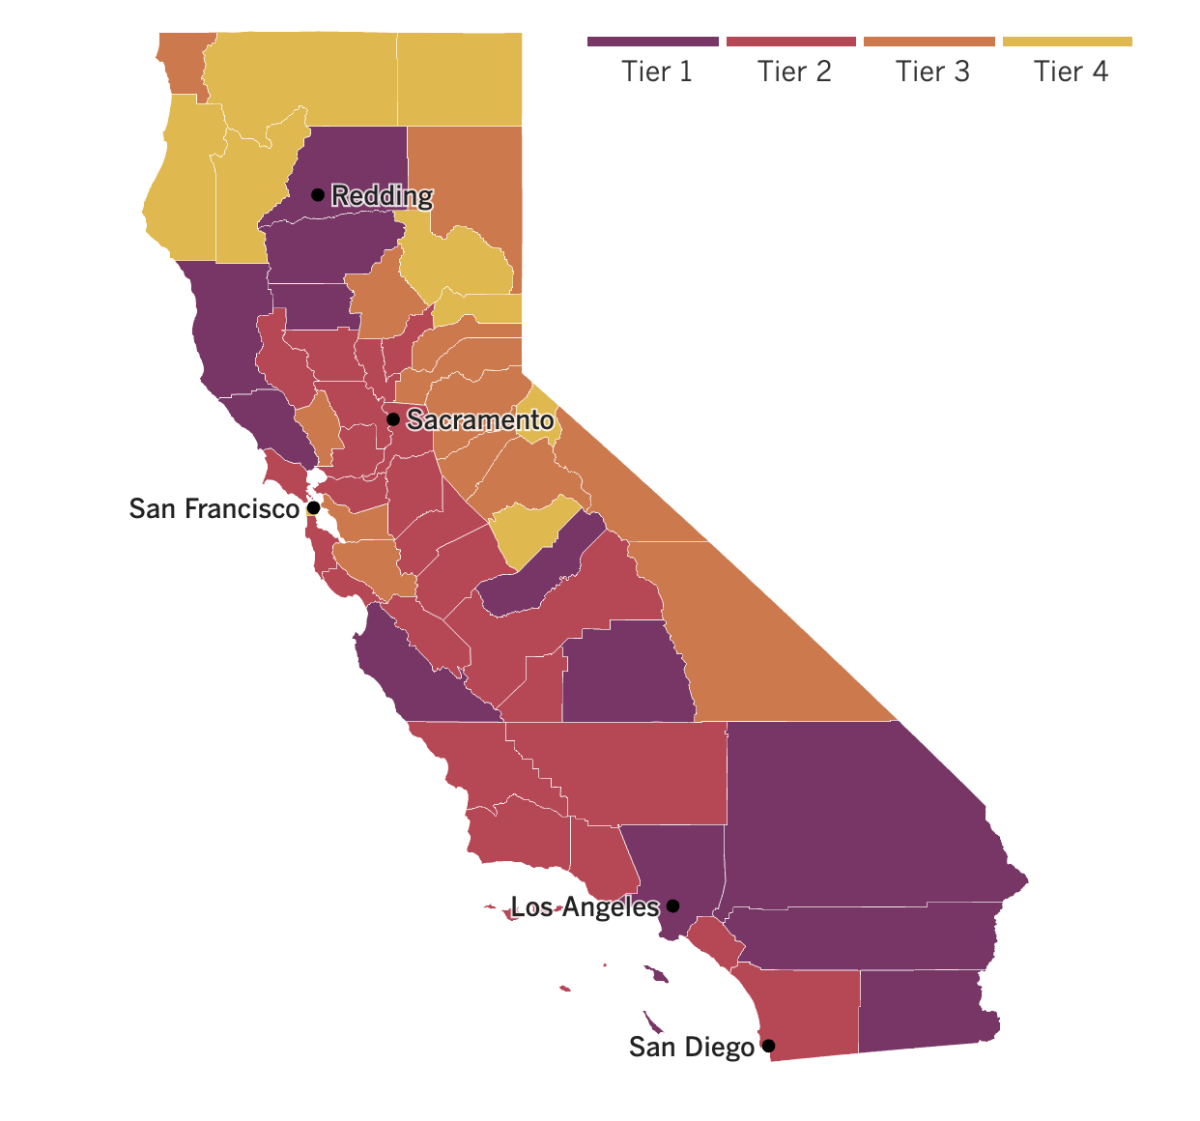 A map of California showing what tiers counties have been assigned under the reopening plan based on local coronavirus risk.